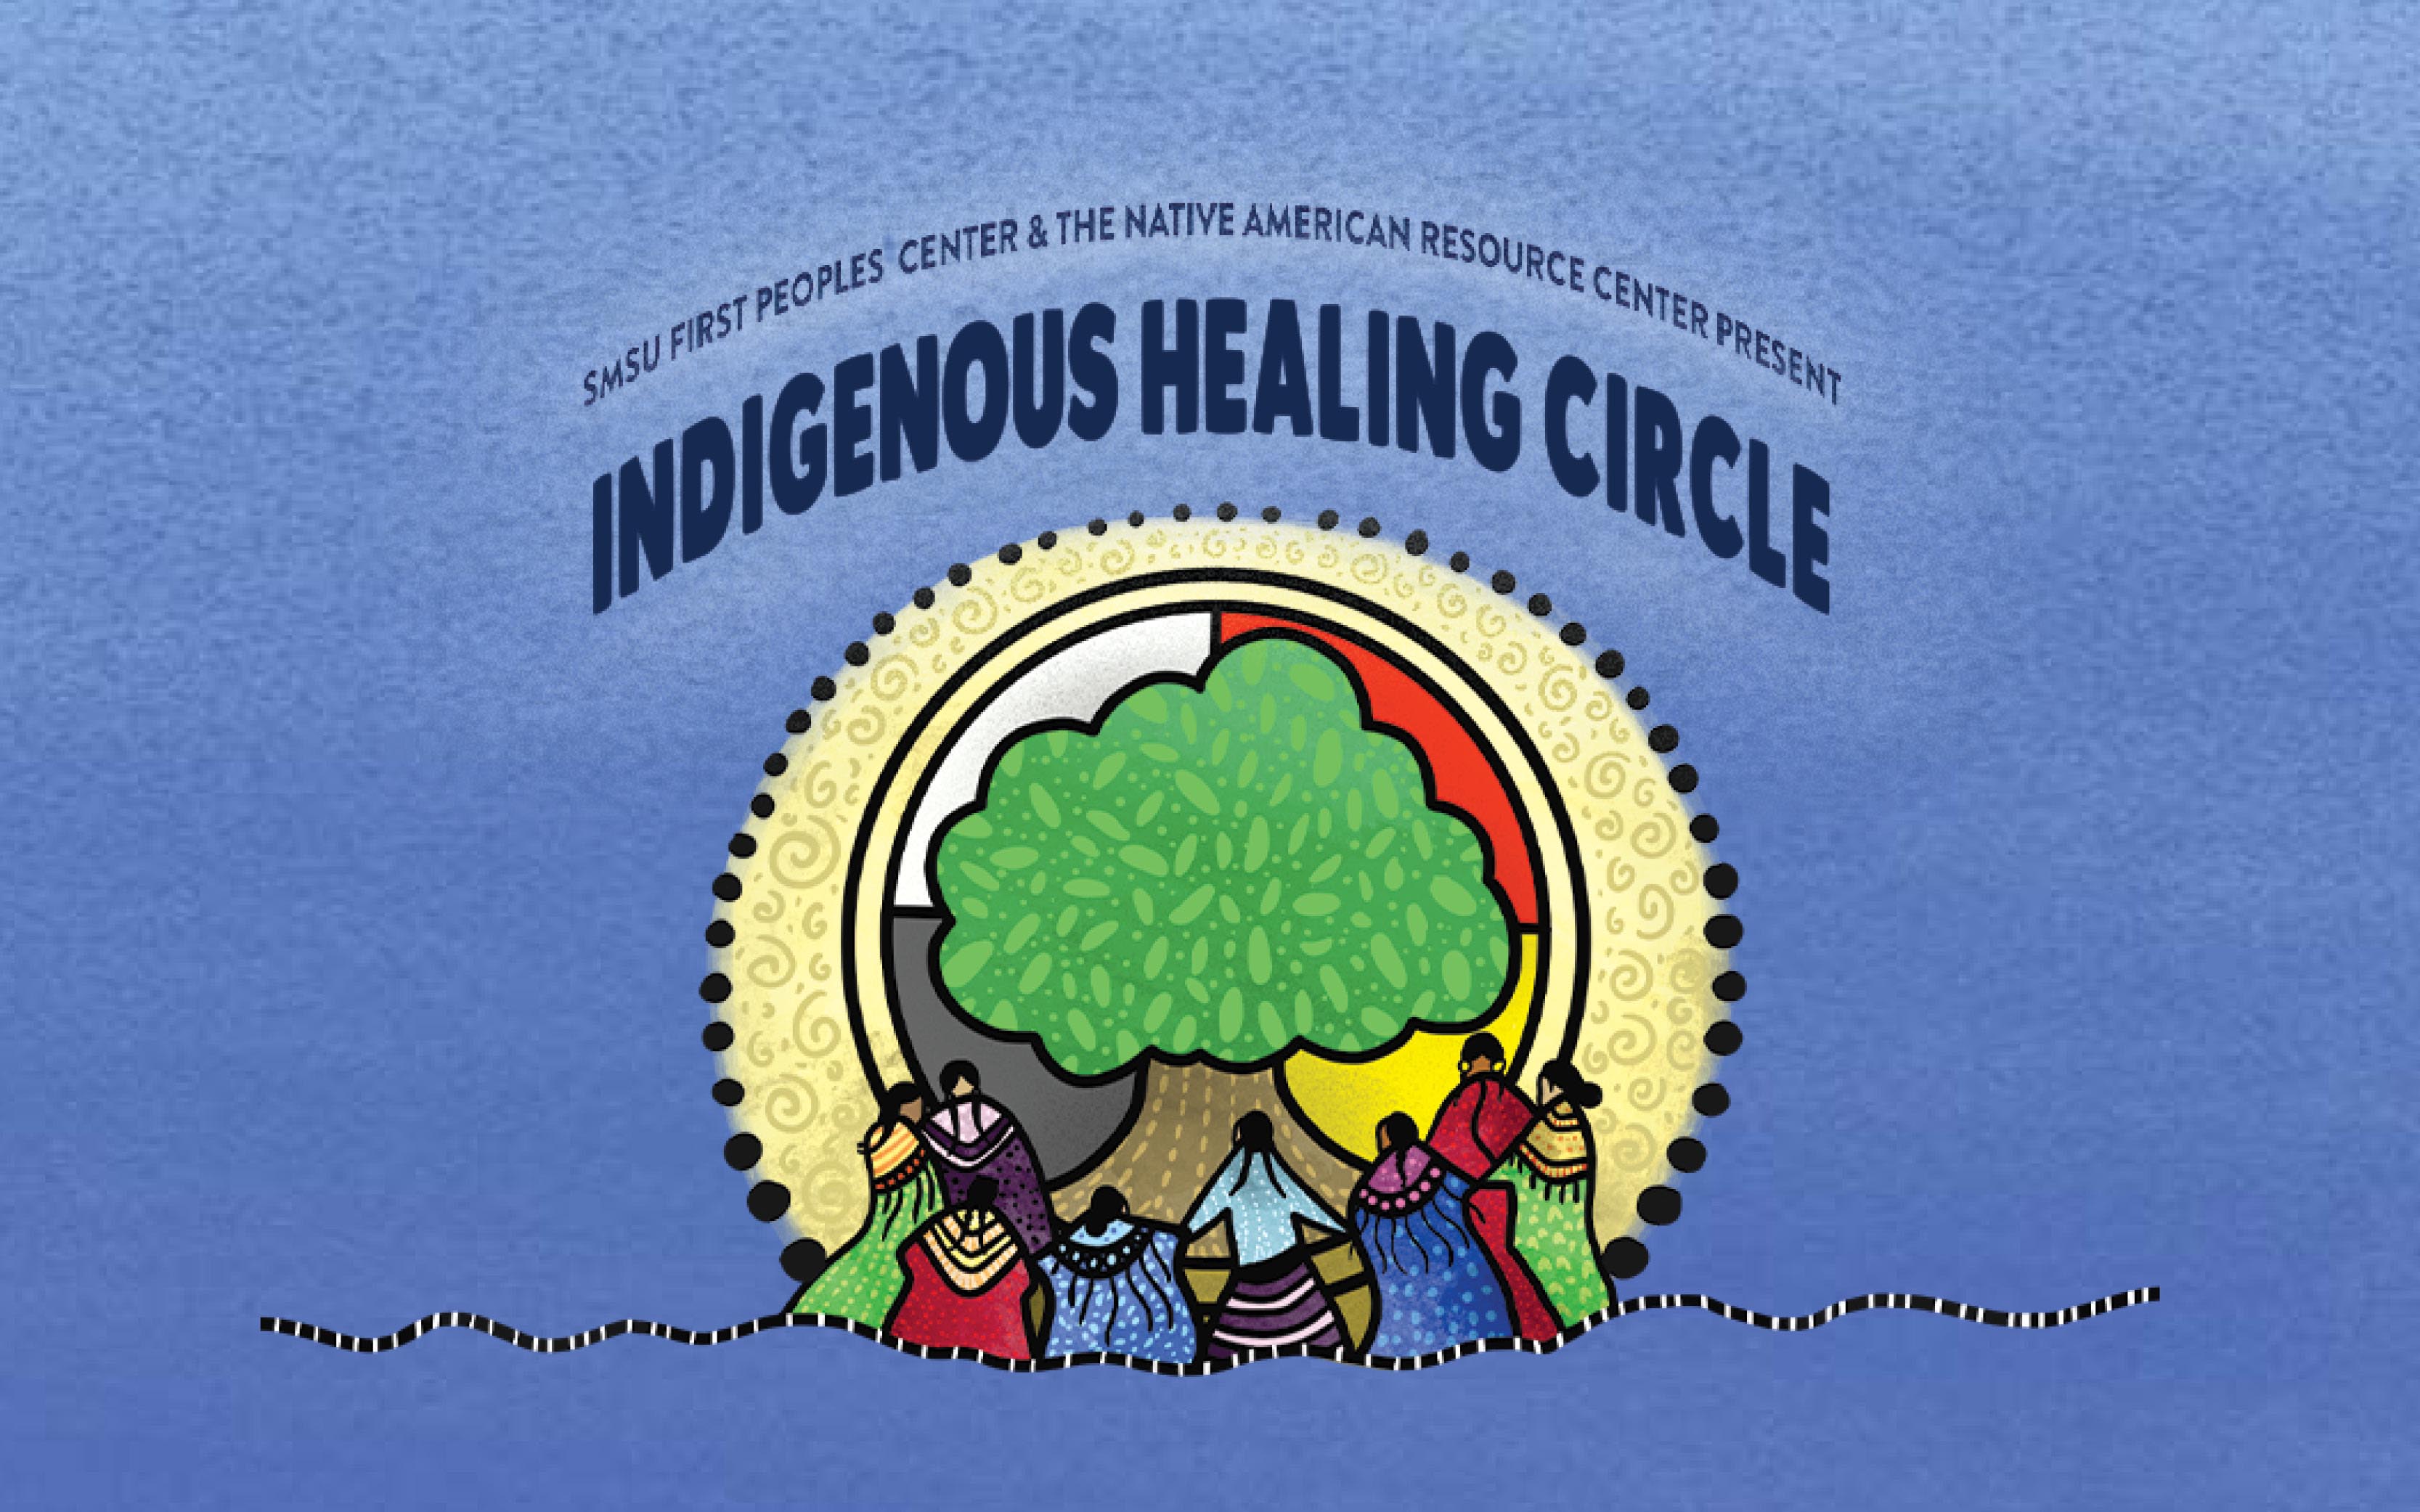 SMSU First Peoples Center presents Indigenous Healing Circle